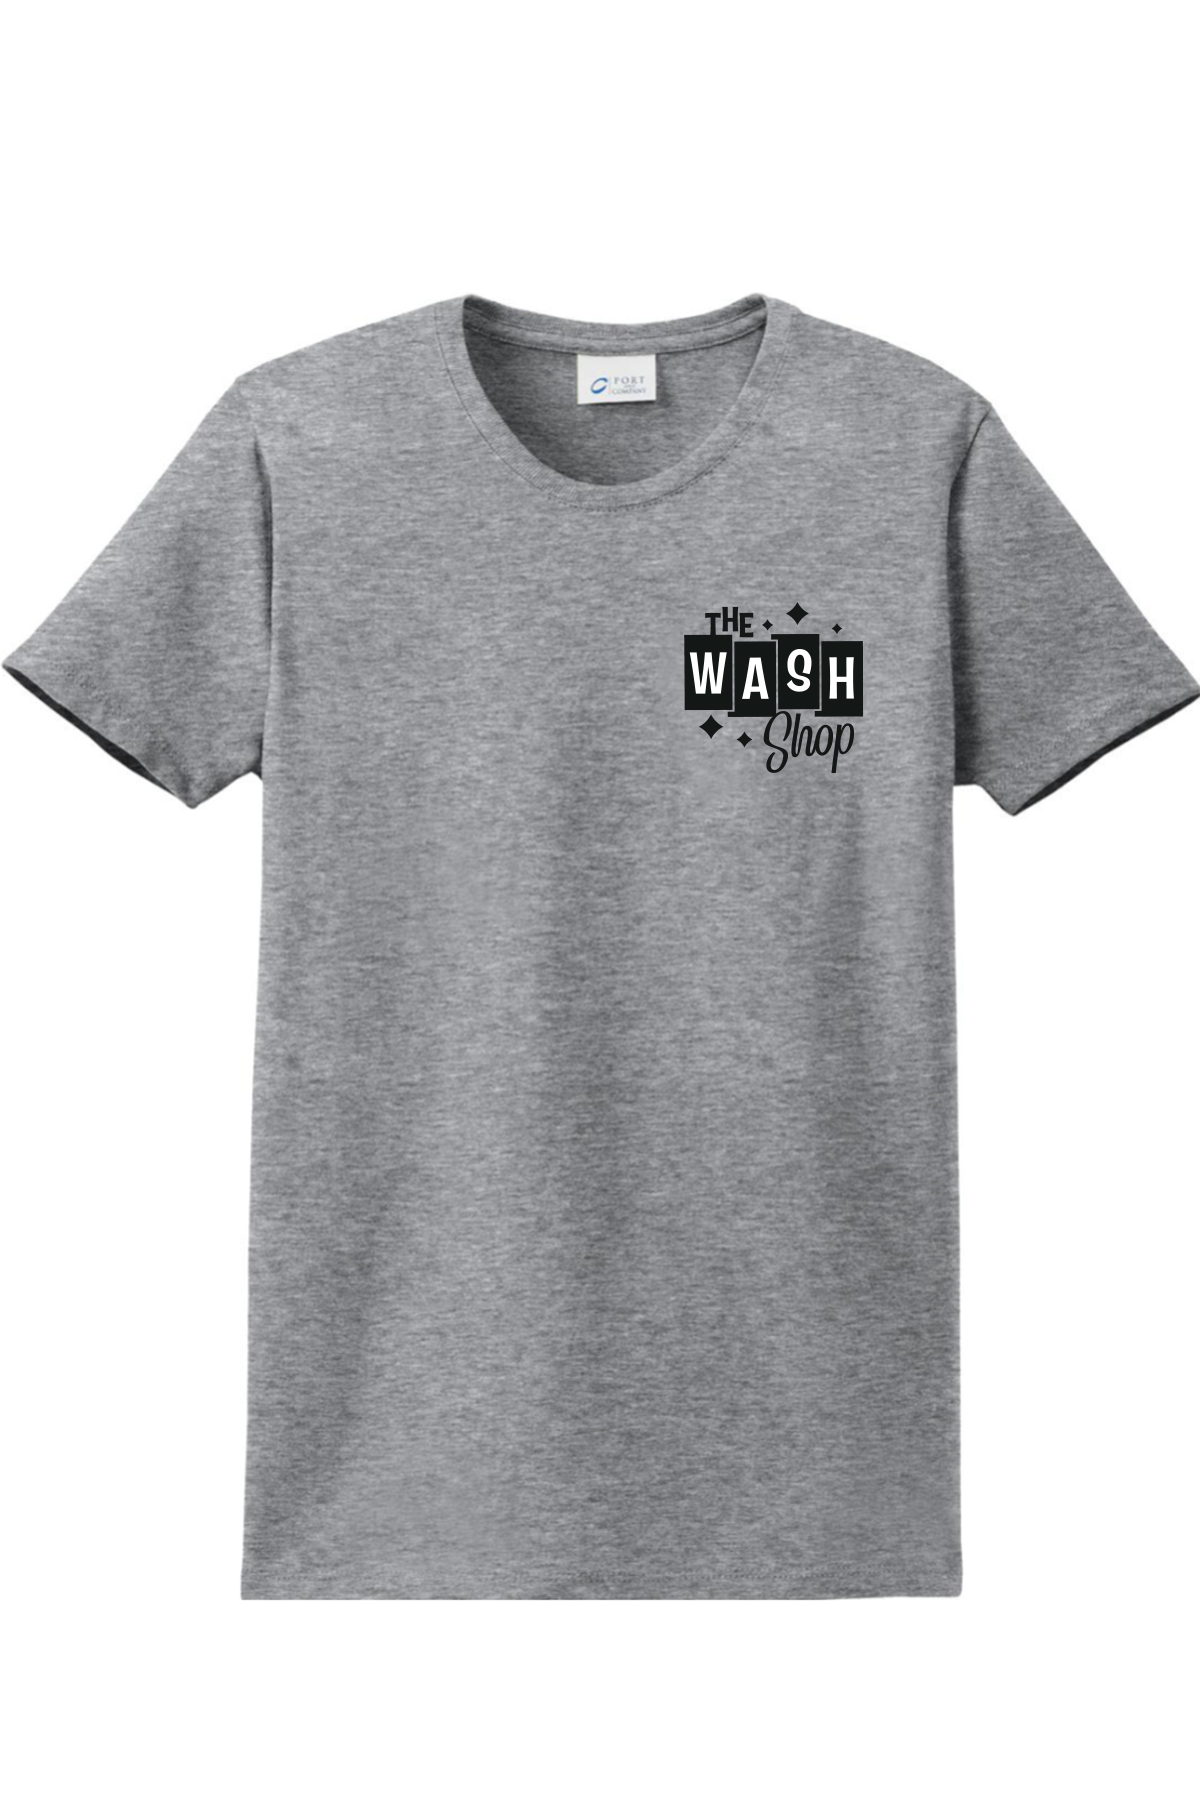 Women's Essential Tee - The Wash Shop